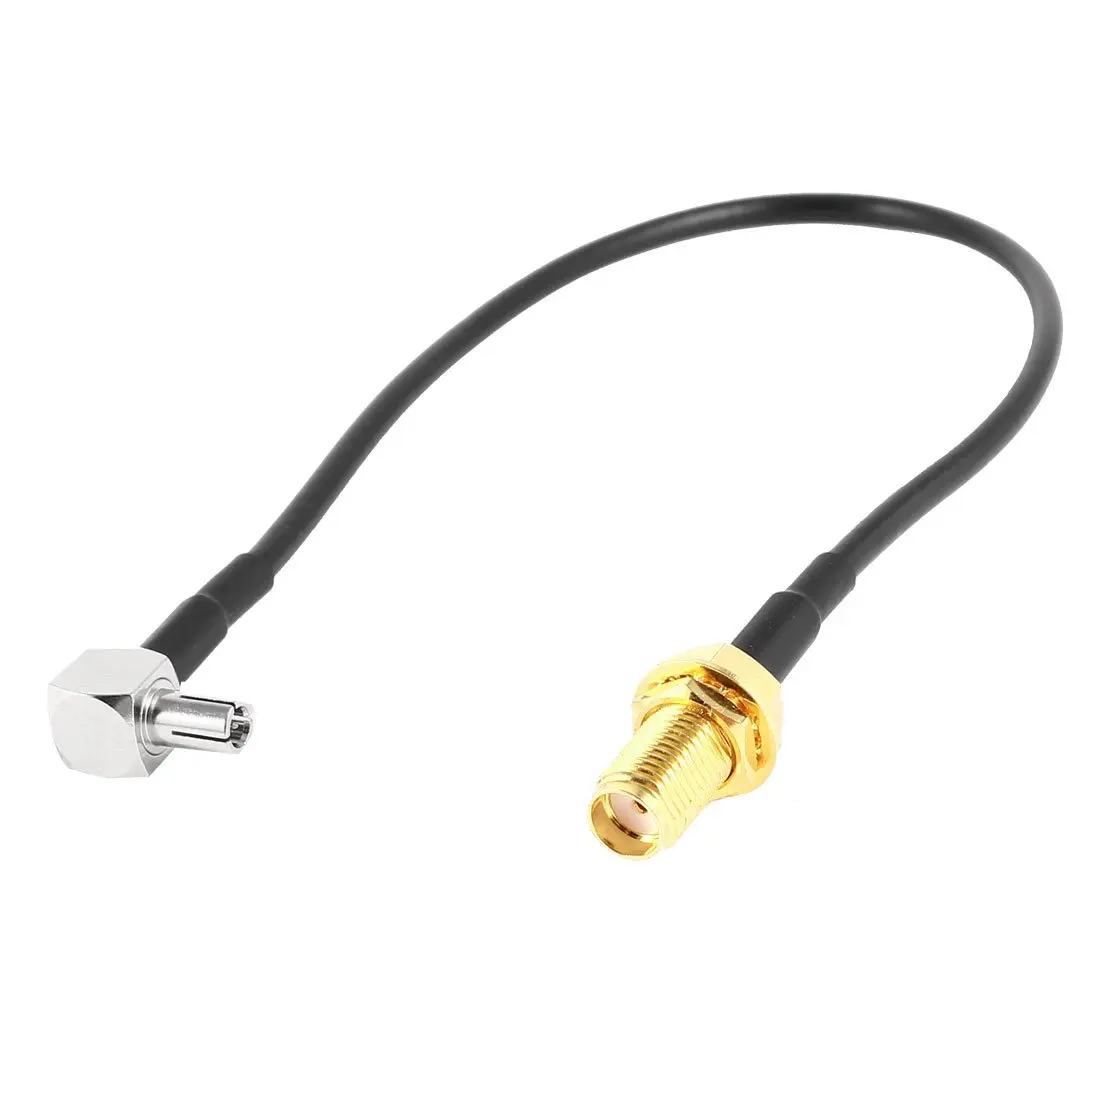 IMC Hot SMA Female Jack to TS9 Male Right Angle Pigtail Coaxial Cable Antenna